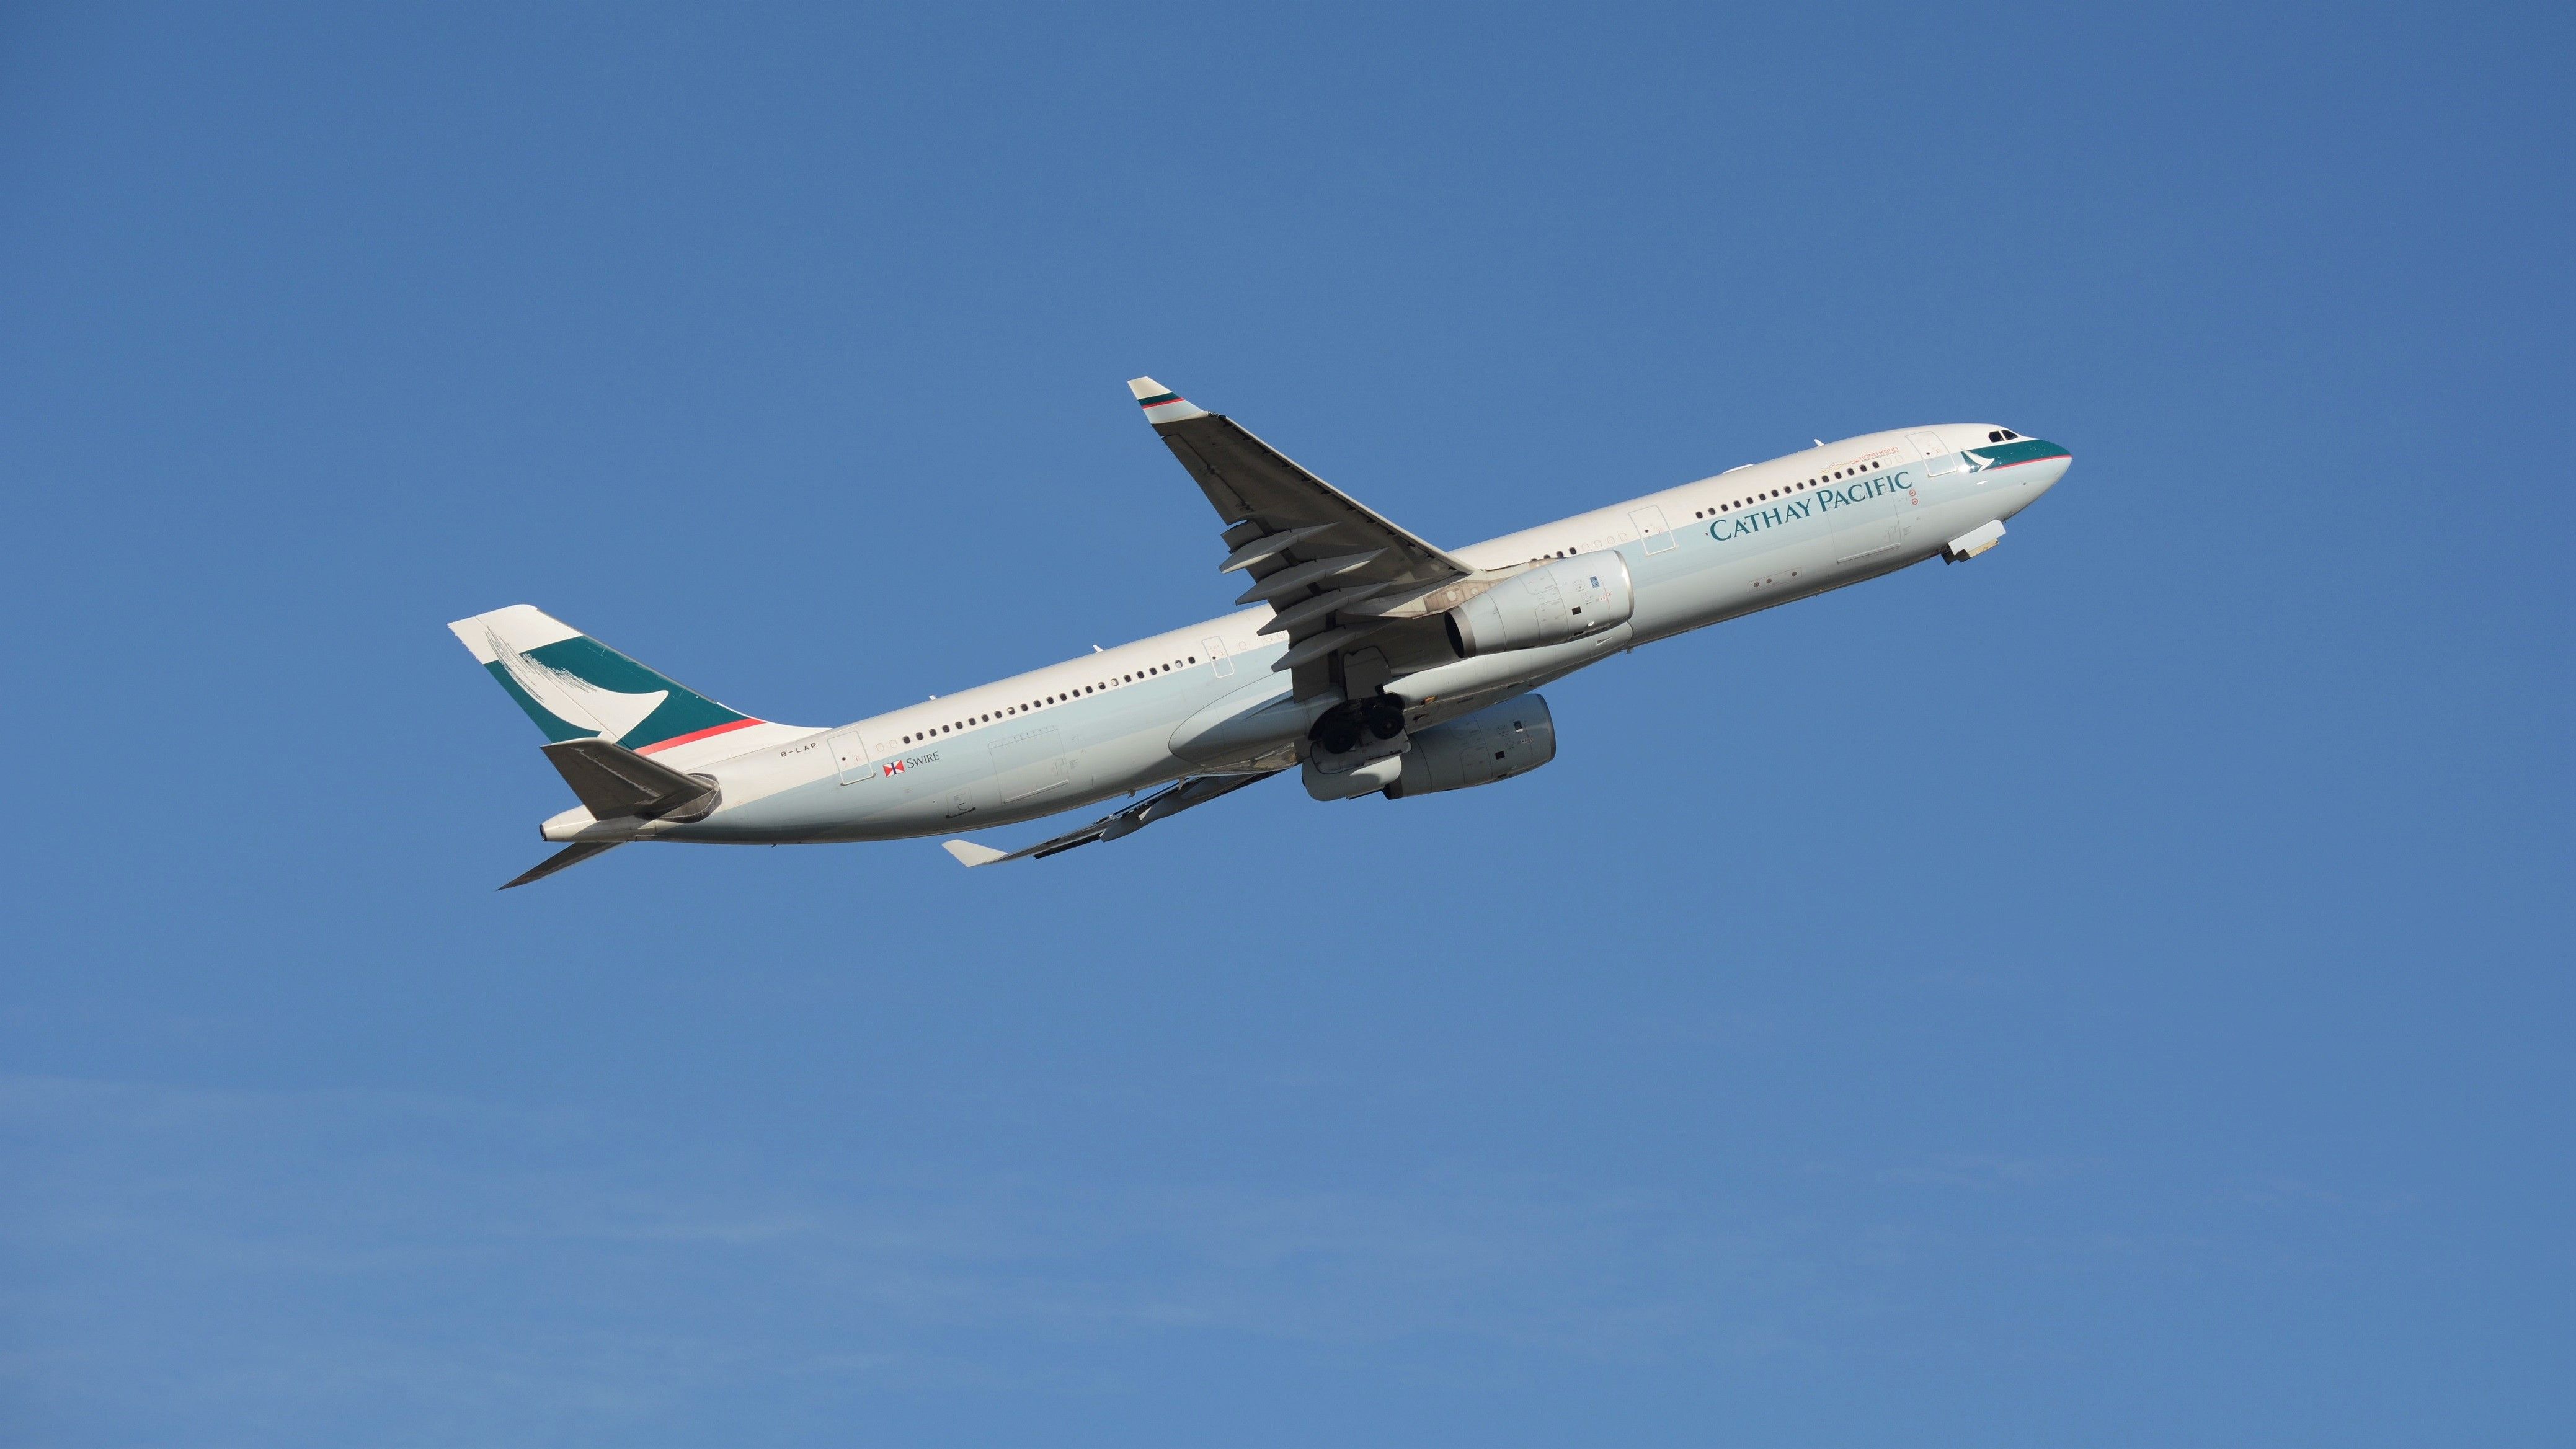 B LAP Cathay Pacific Airbus A330 Sydney 4k Ultra HD Wallpaper